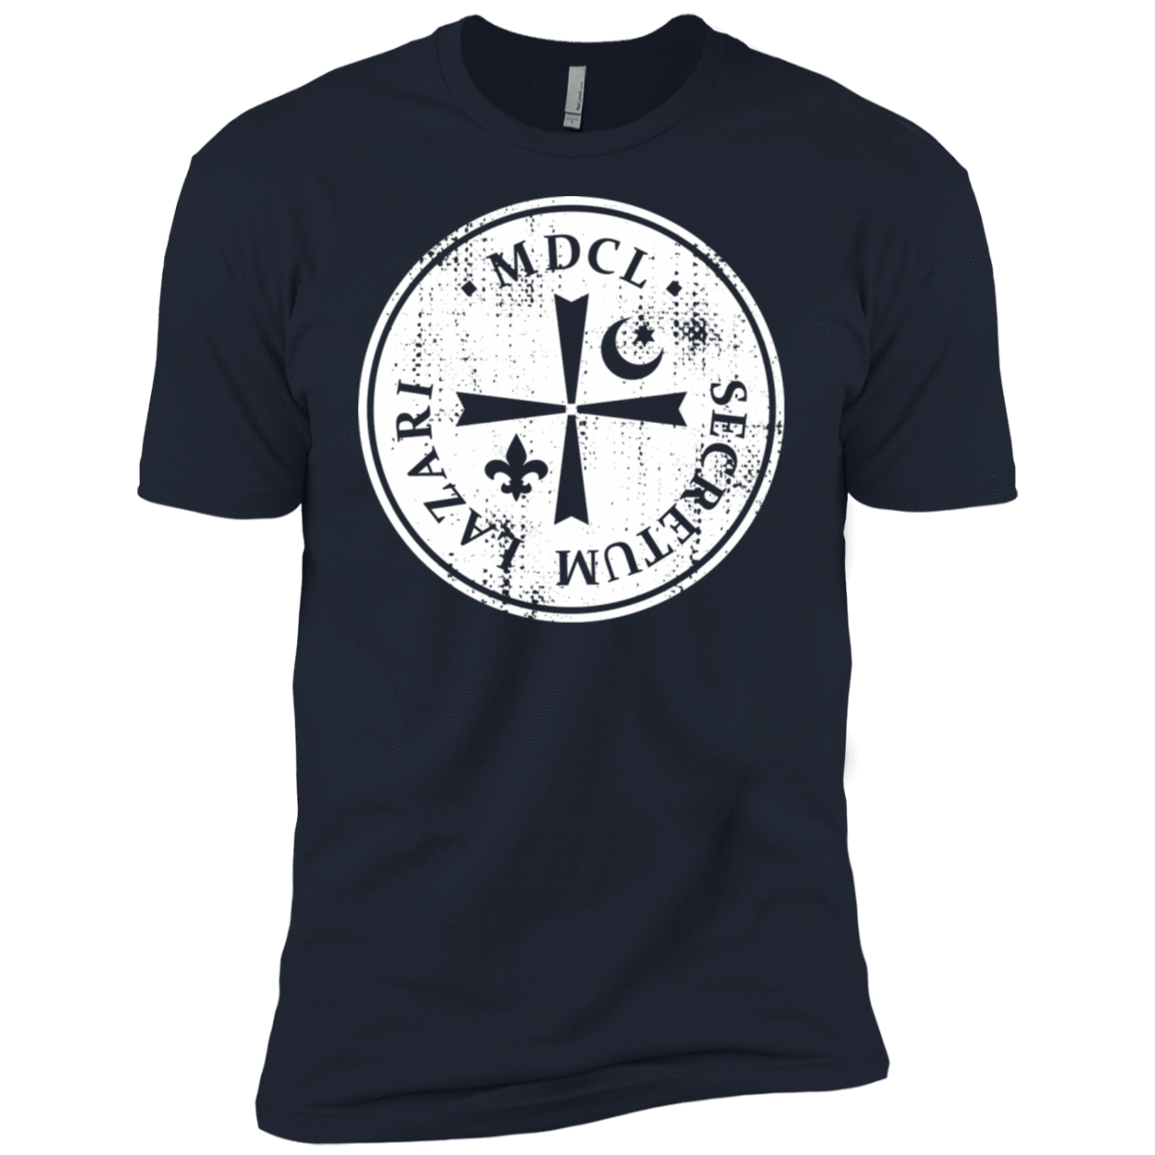 T-Shirts Midnight Navy / X-Small A Discovery Of Witches Men's Premium T-Shirt